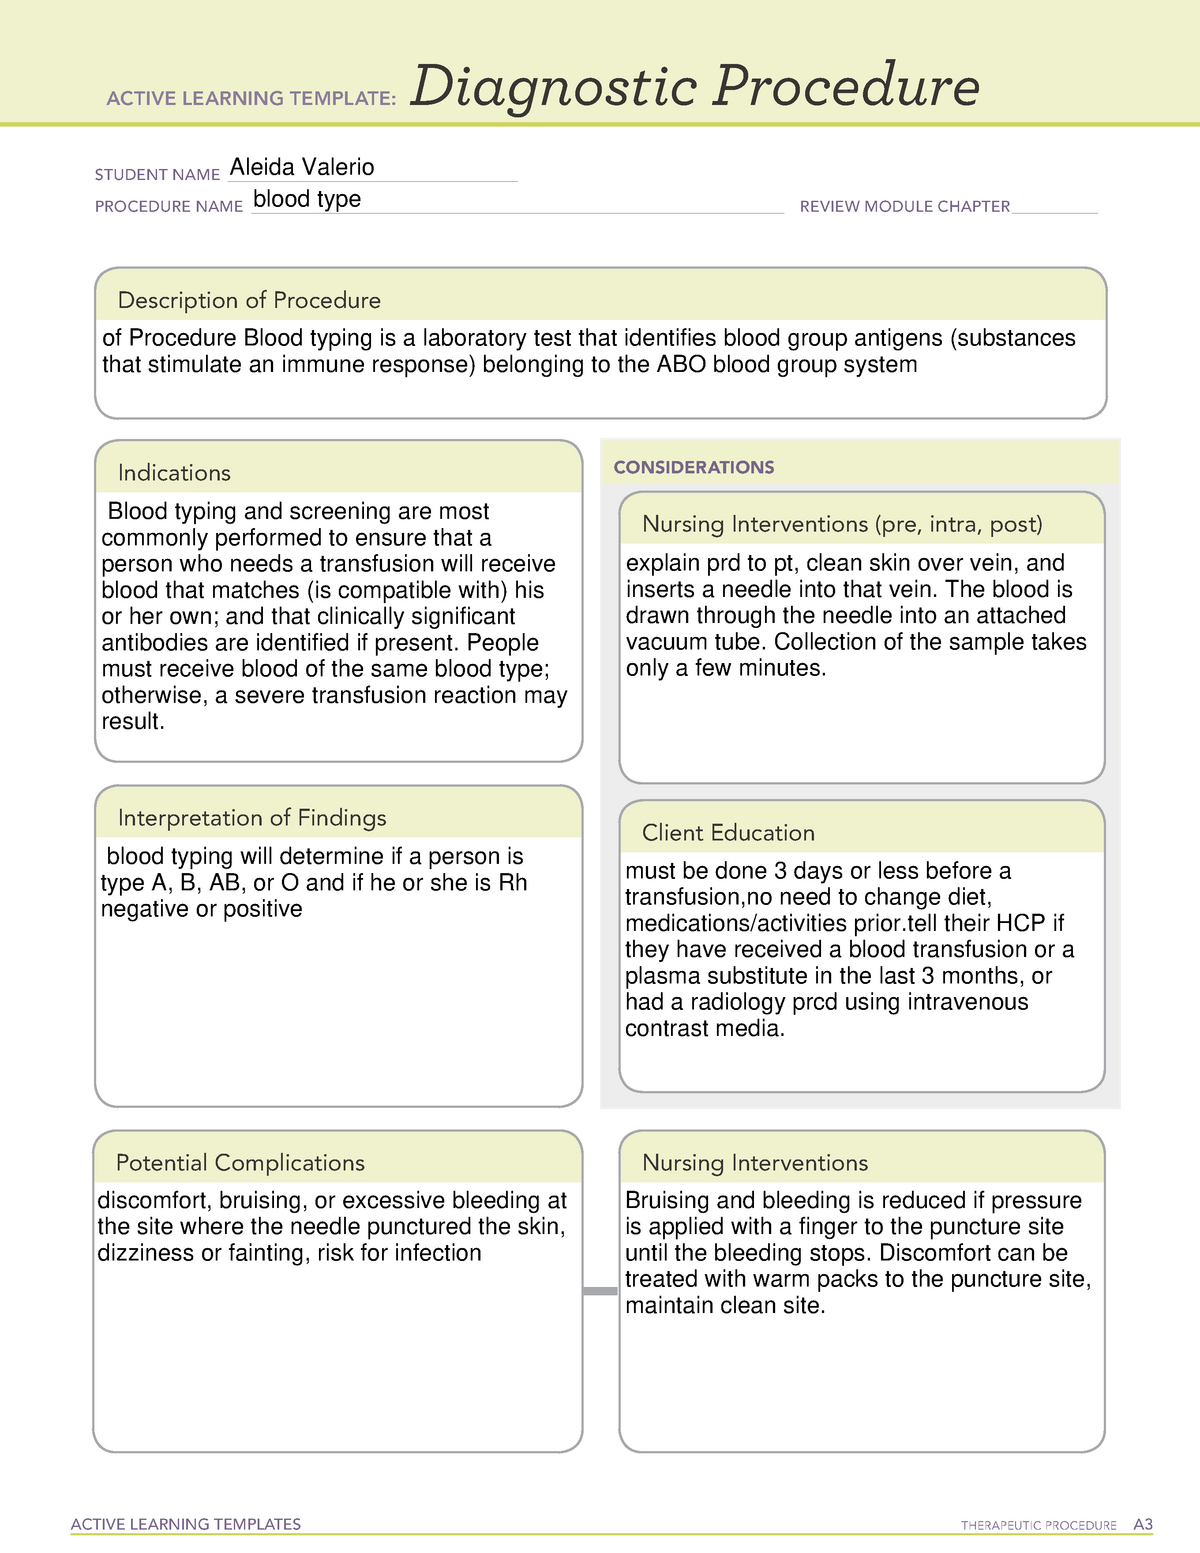 active-learning-template-diagnostic-procedure-form-2-blood-type-active-learning-templates